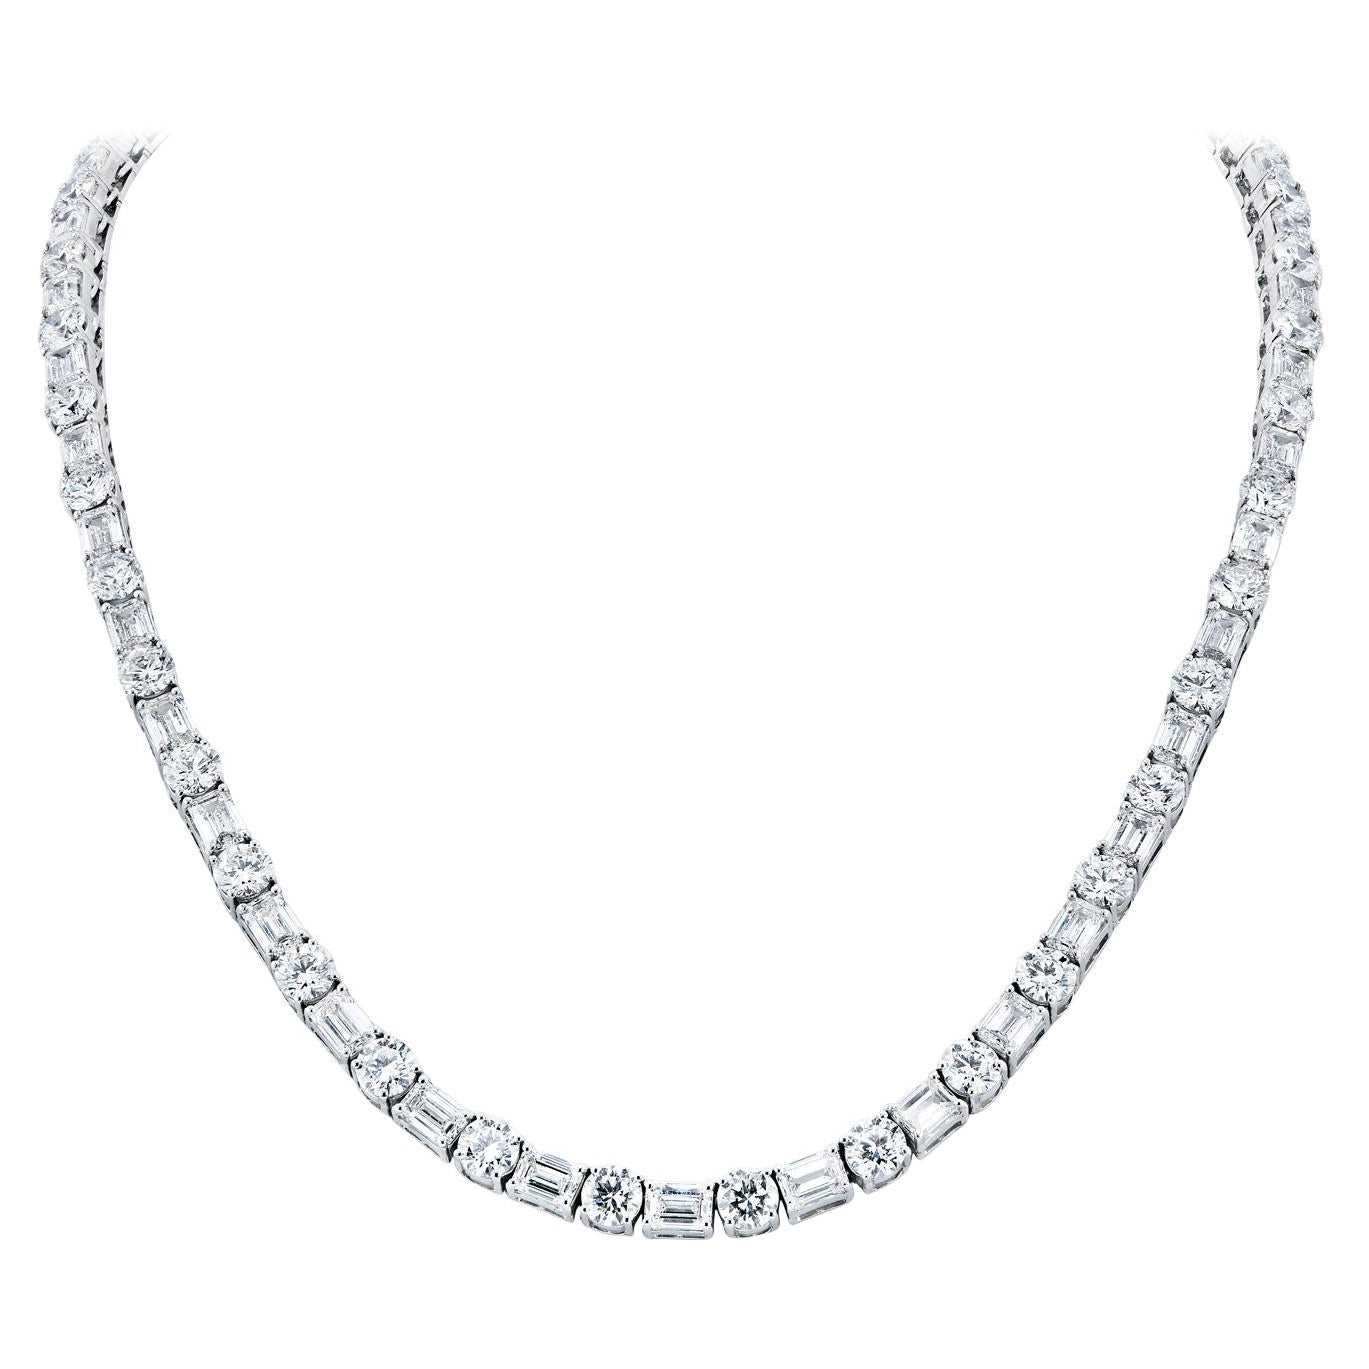 85 Carat Round and Emerald Cut Diamond Tennis Necklace Certified